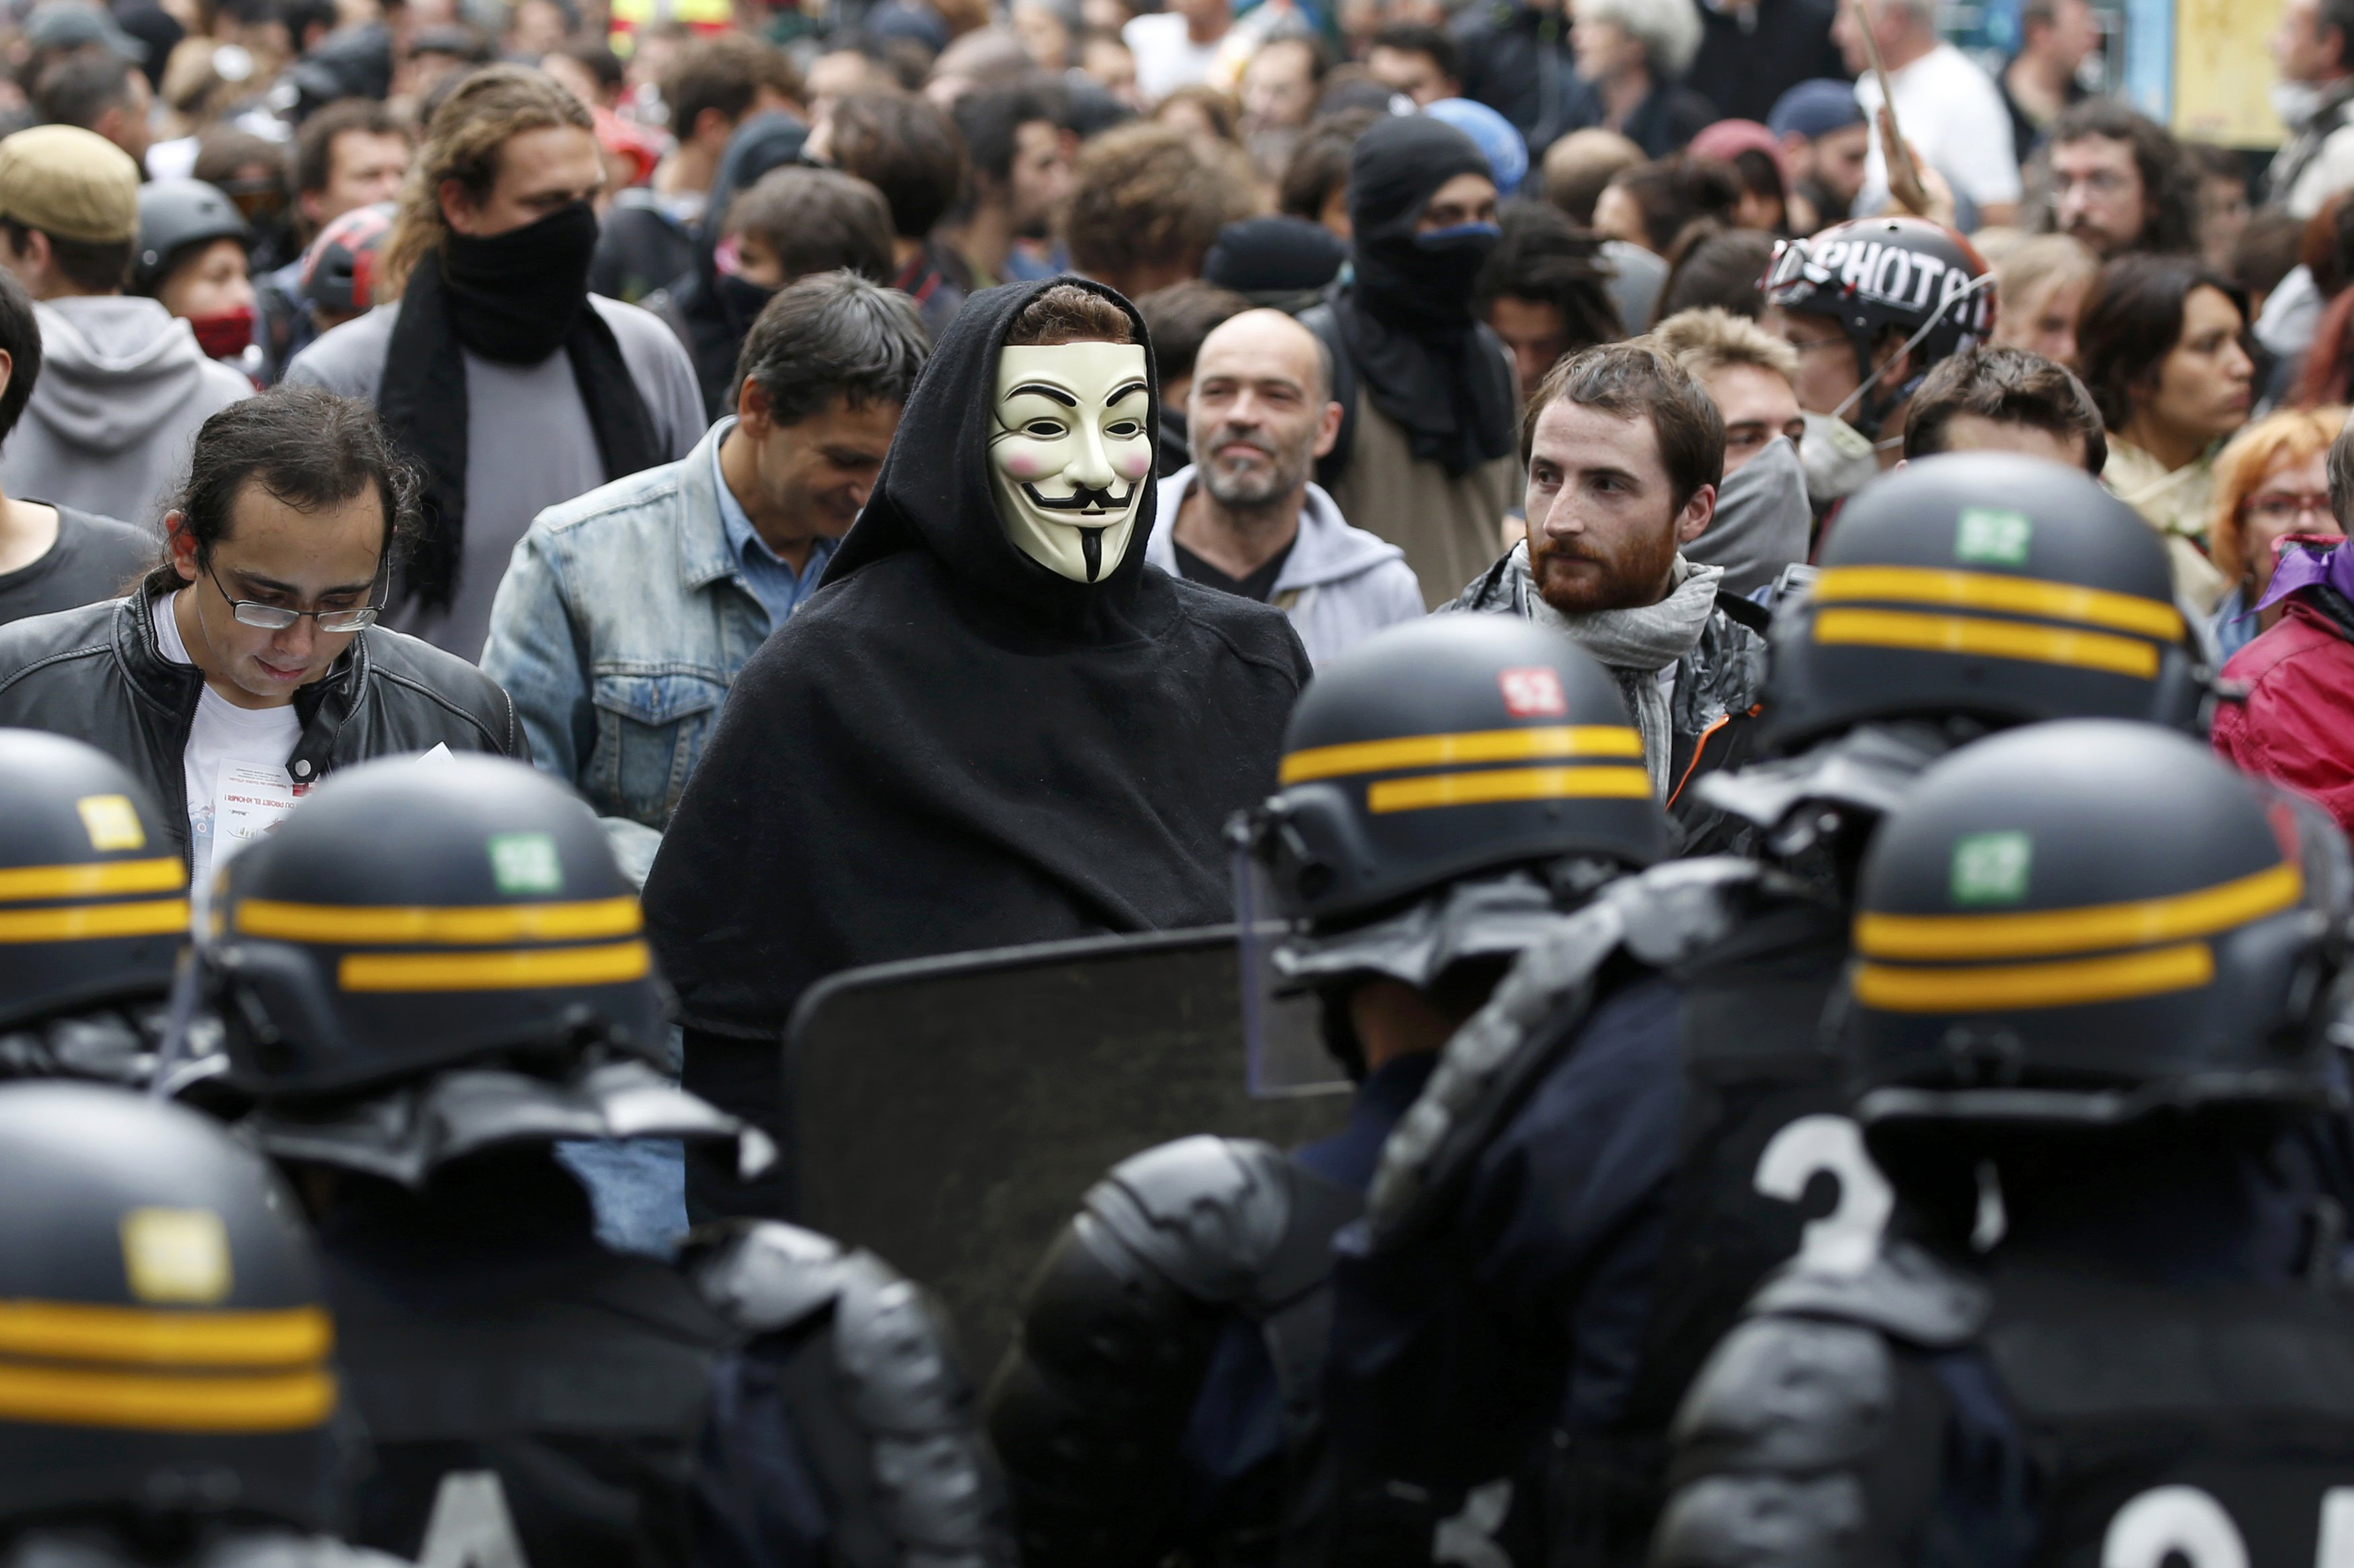 A protester, wearing a Guy Fawkes mask, walks past French riot police as French labour union members march march in Paris, France, to demonstrate against the new French labour law, September 15, 2016. REUTERS/Charles Platiau